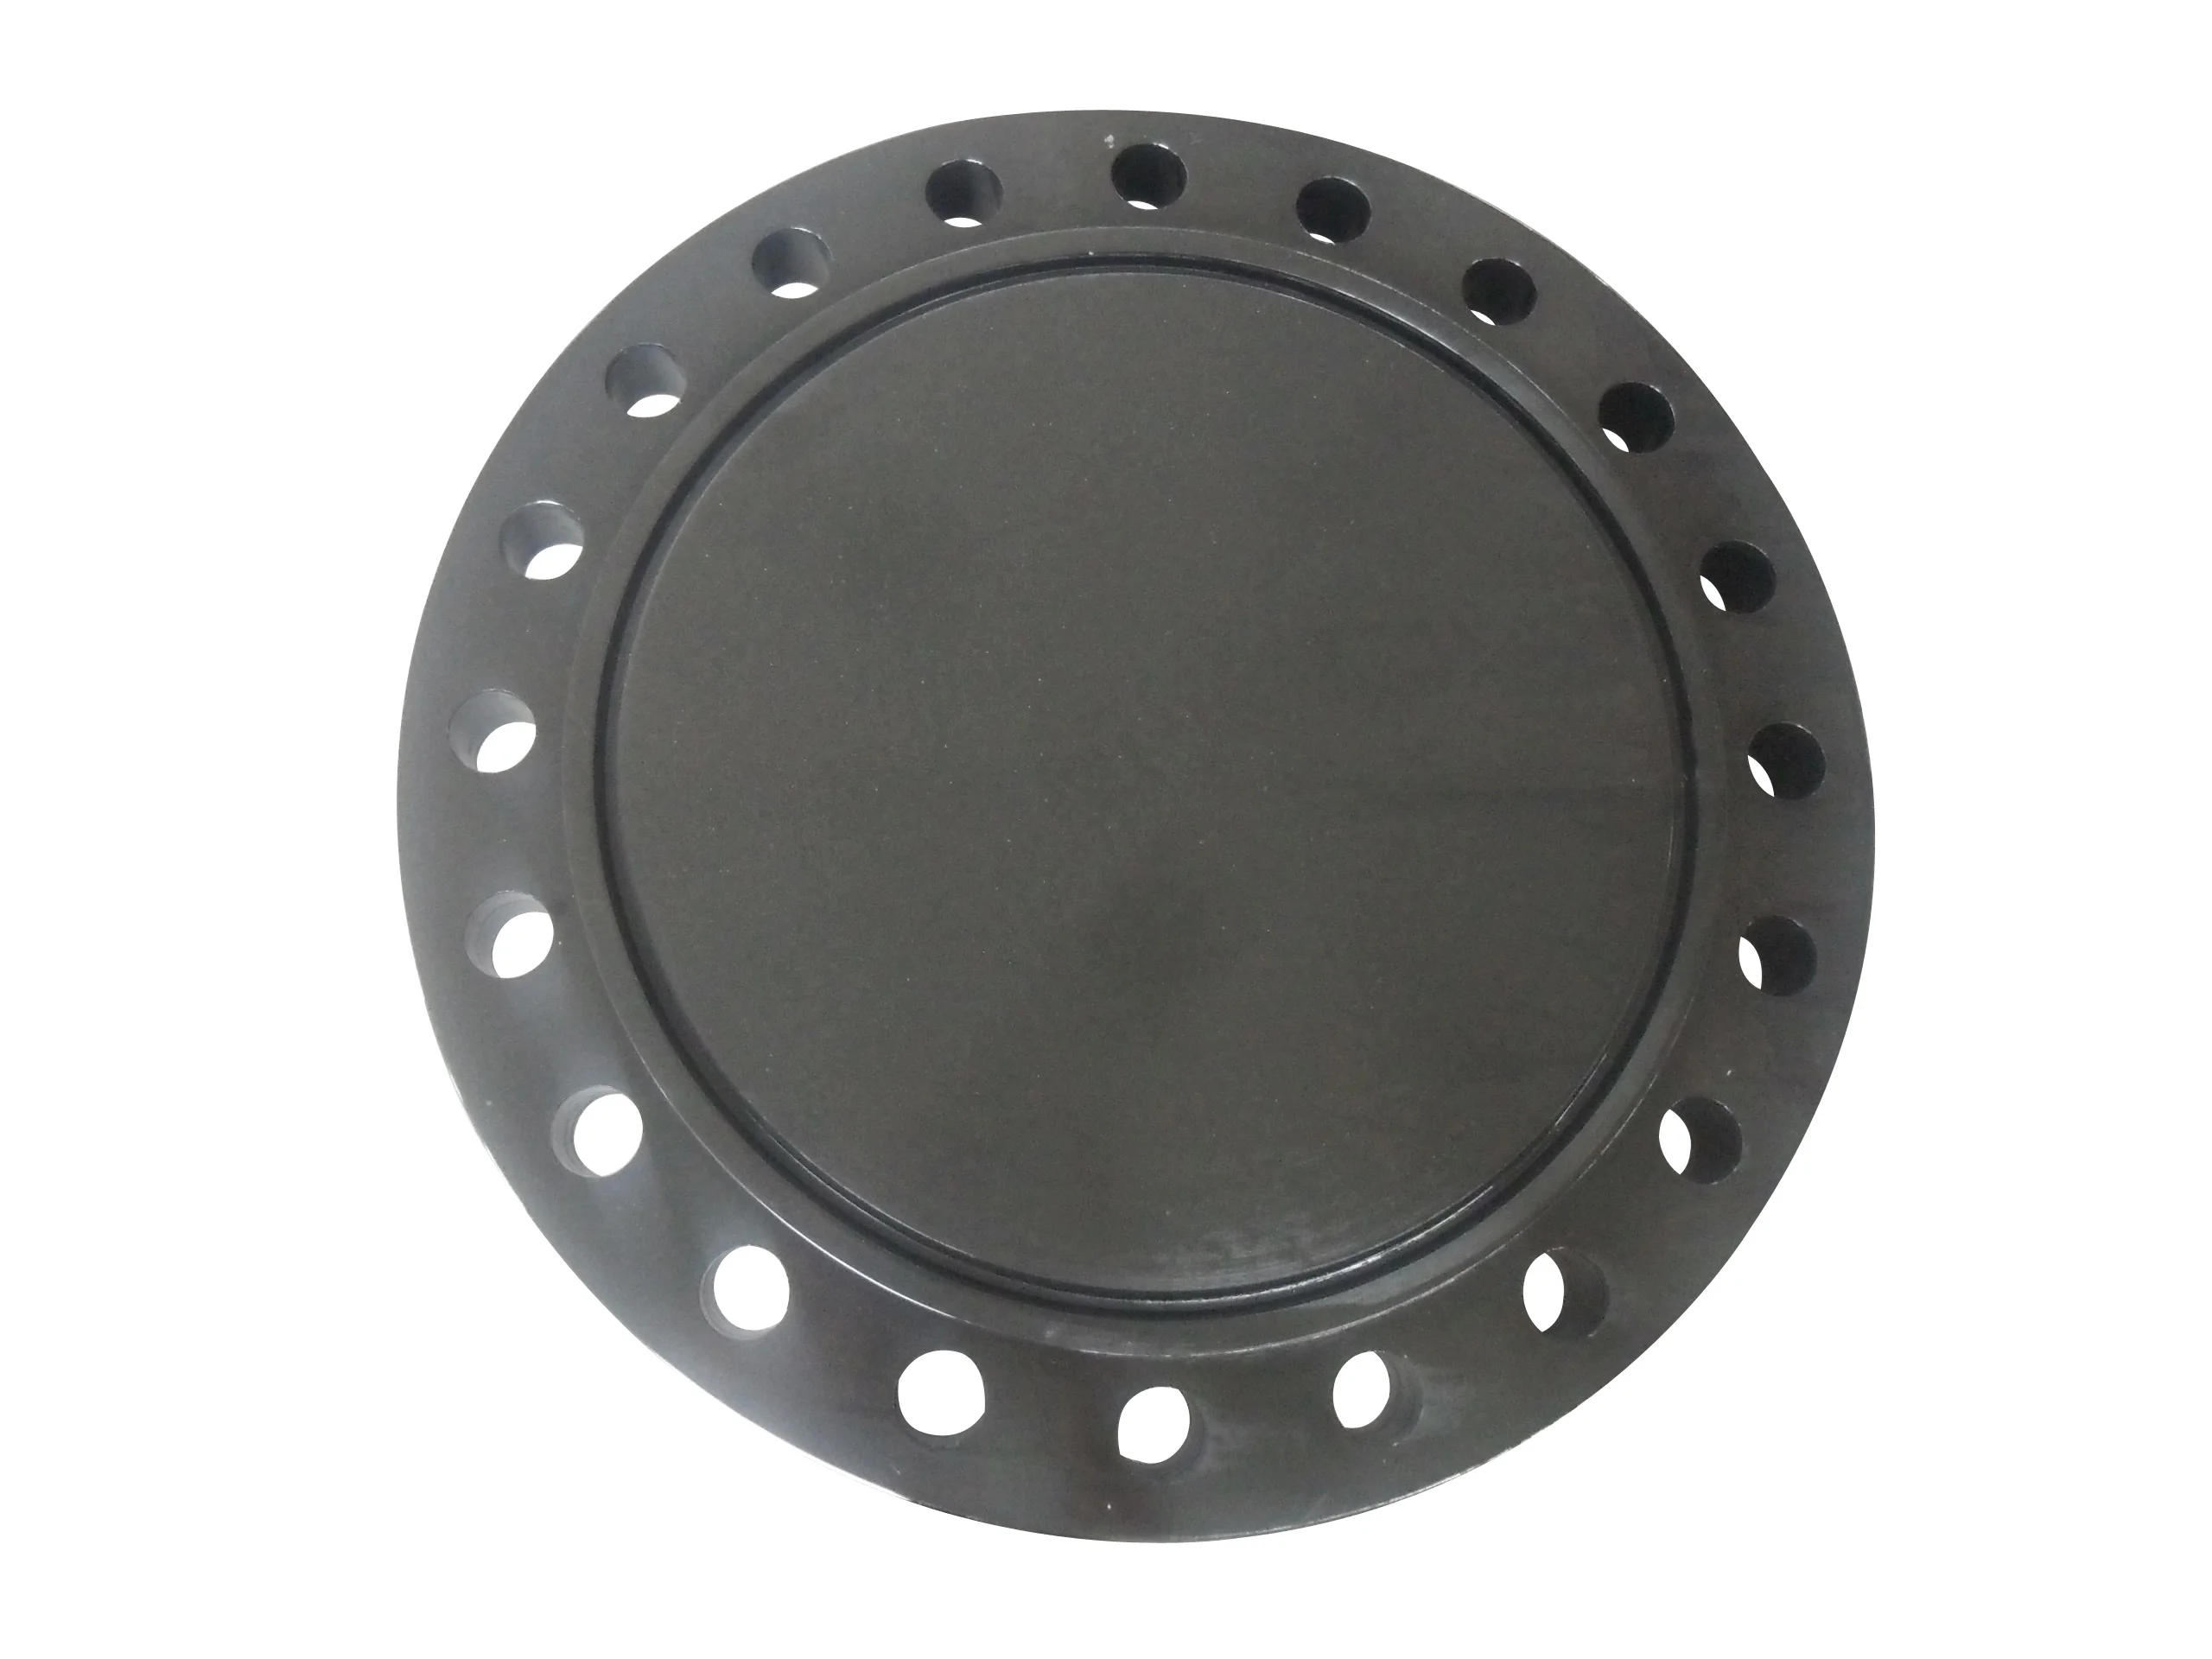 ASTM A105 Class 150 12 Inch Carbon Steel flange joint